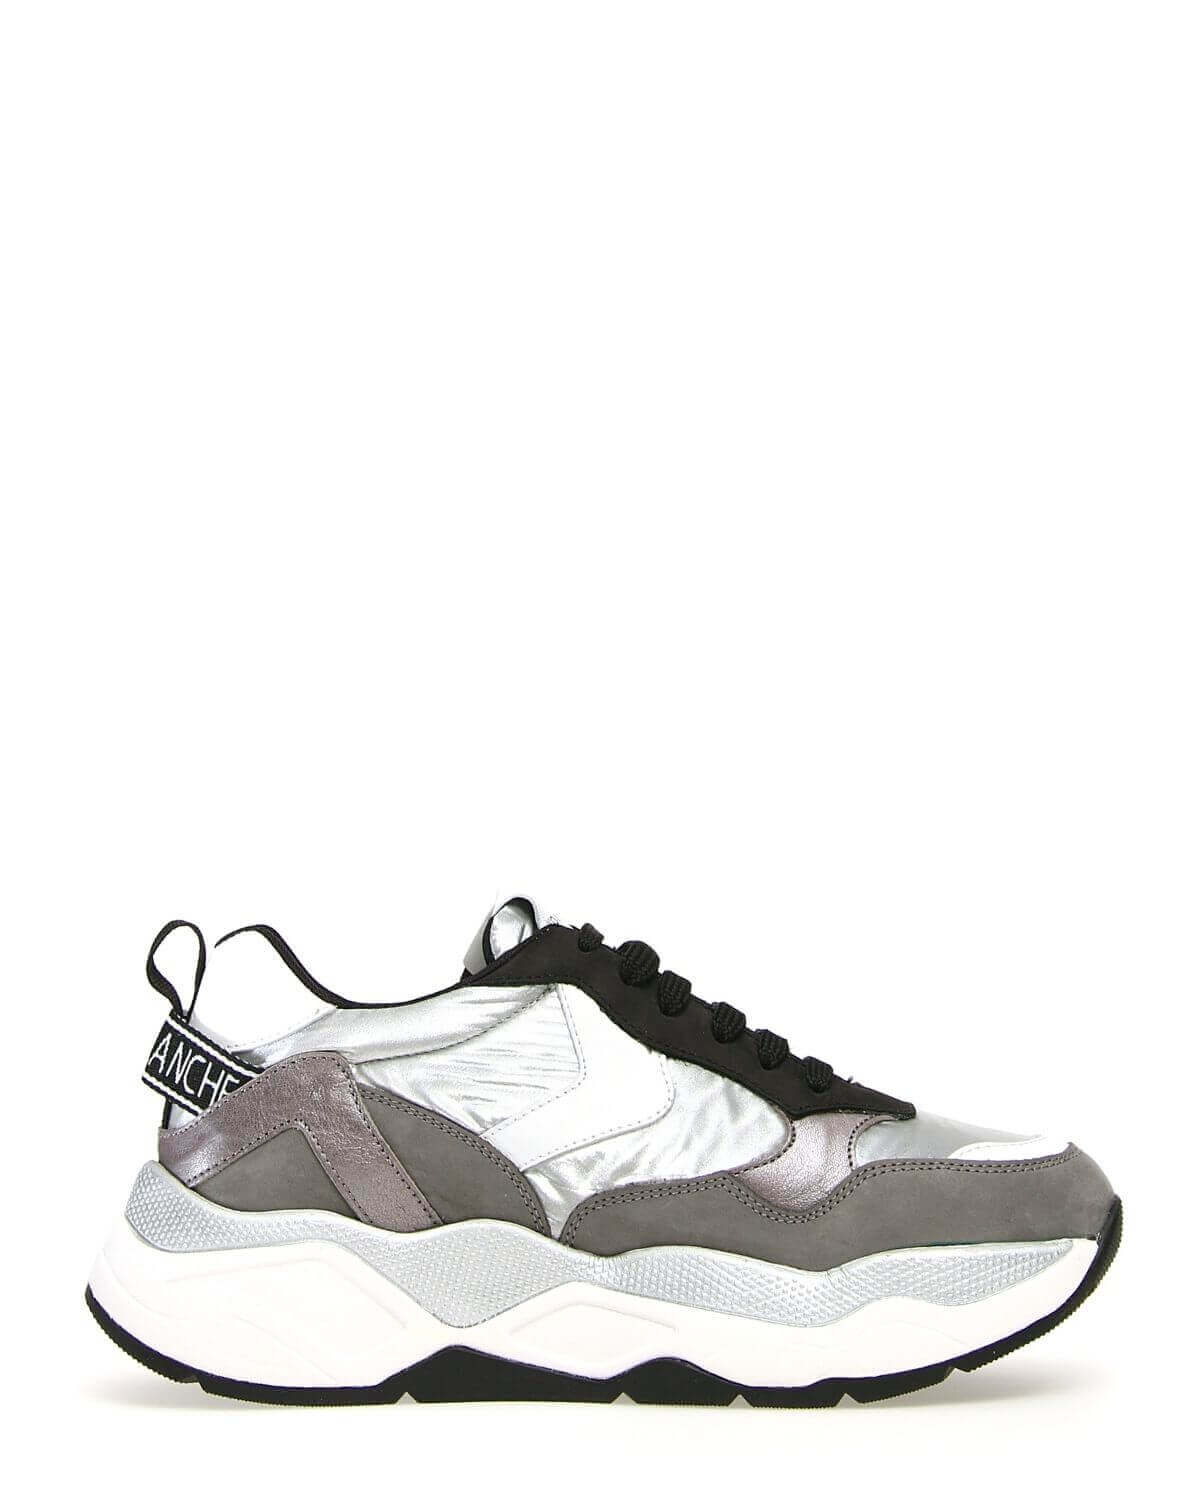 SNEAKERS VOILE BLANCHE BEA 02